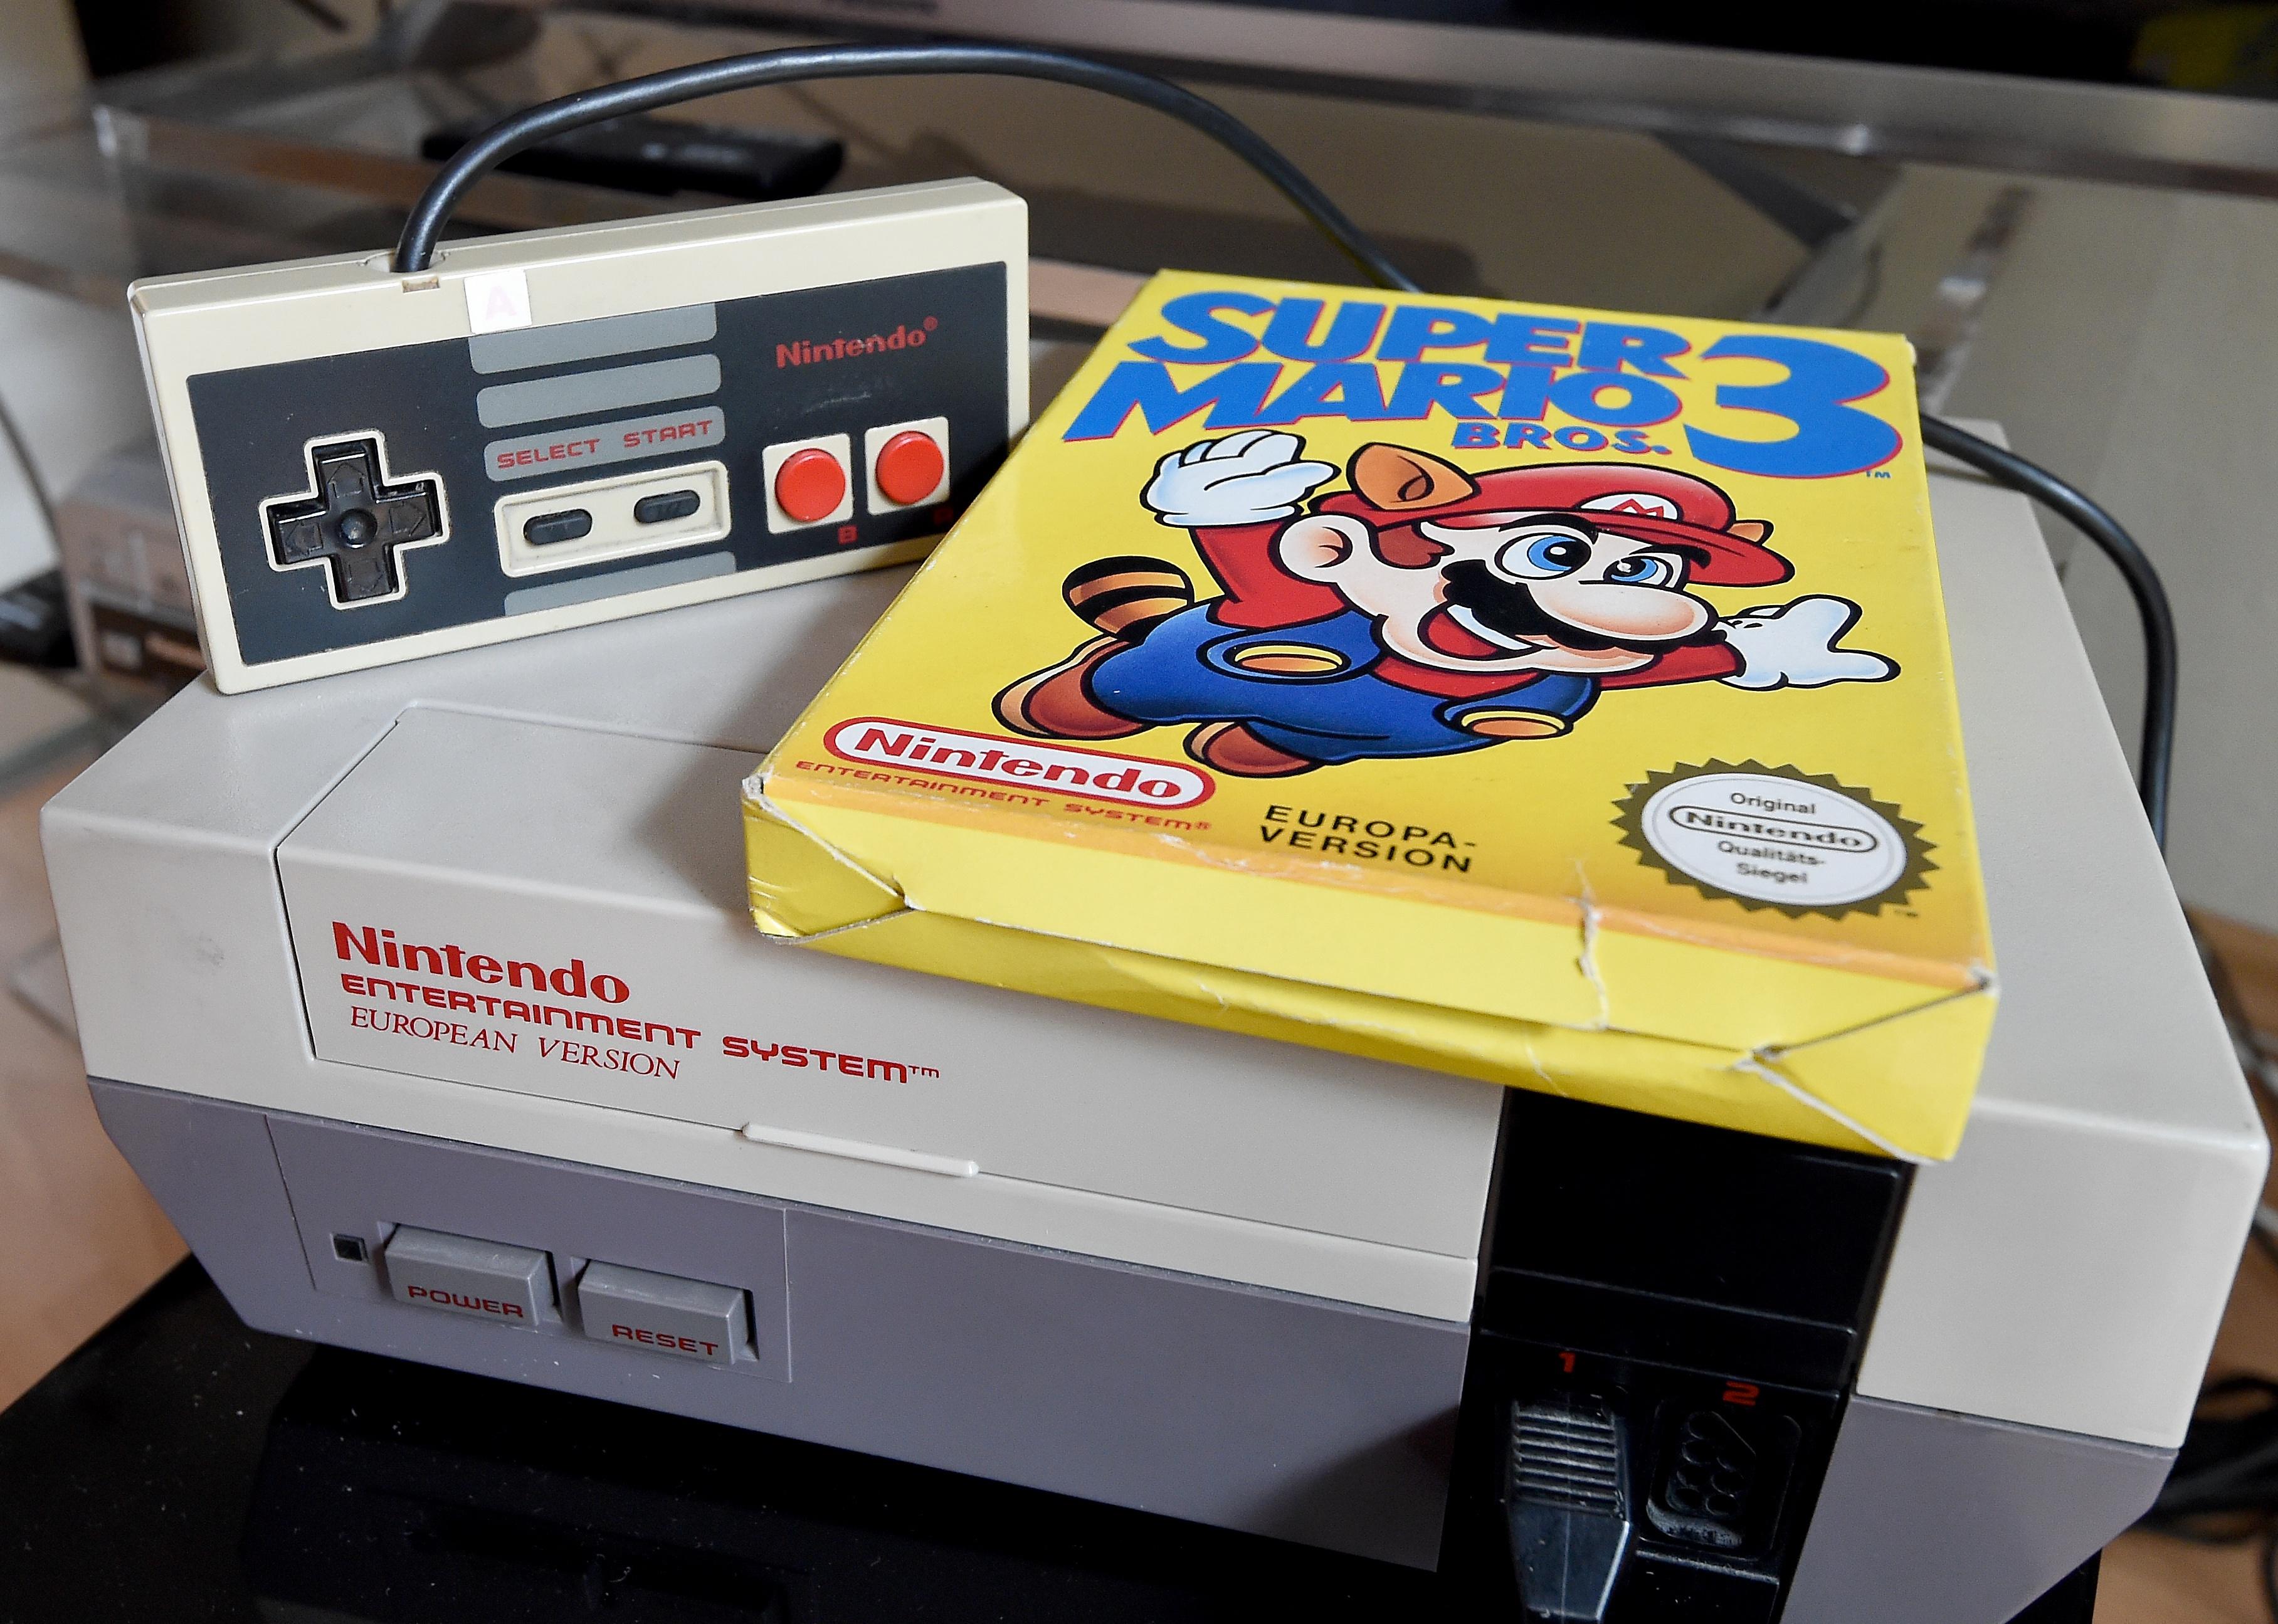 A 'Super Mario 3' game is on top of a 1980's NES games console.